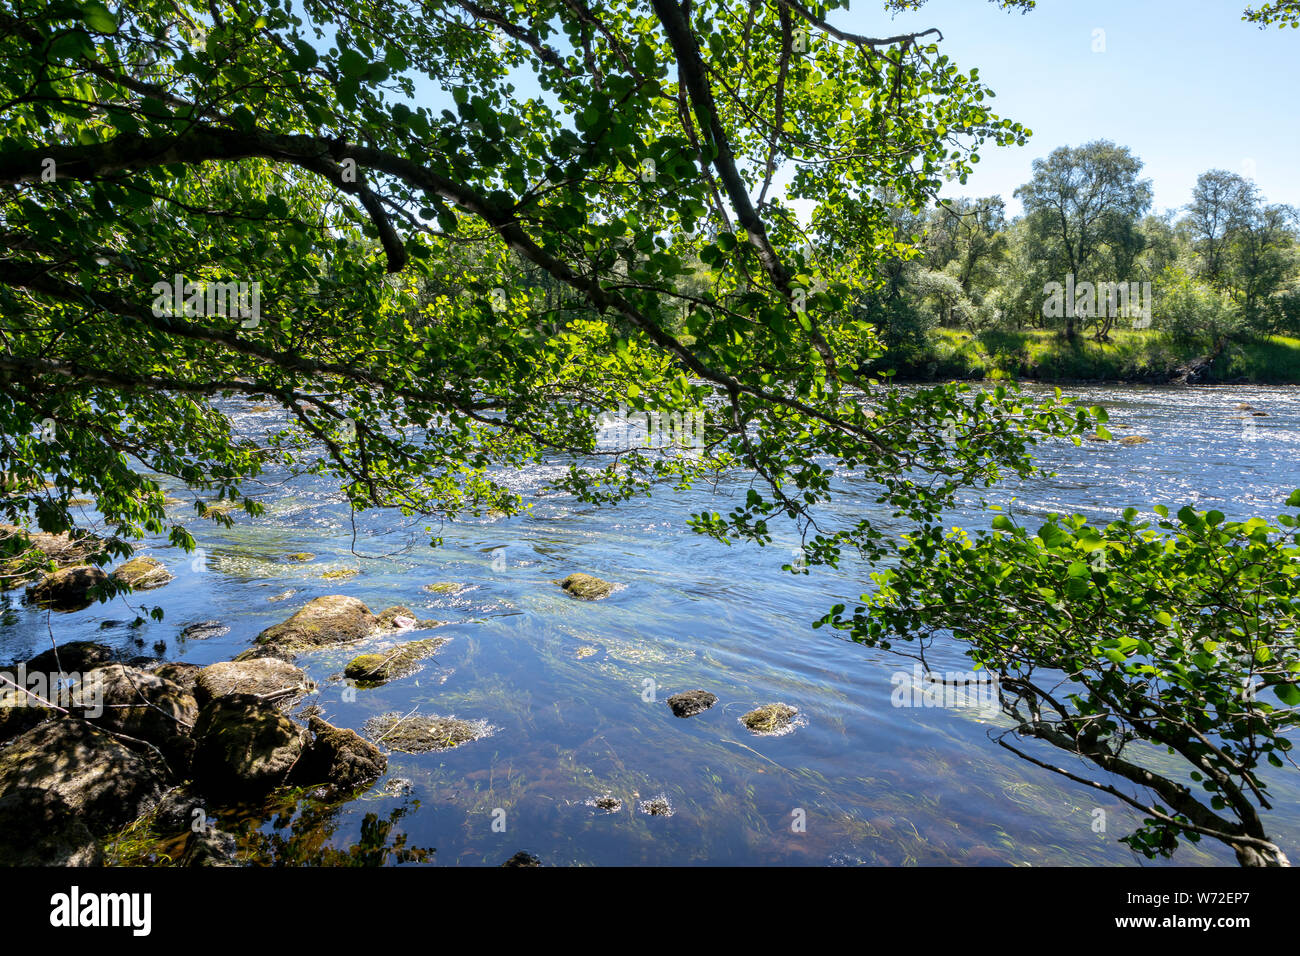 river bank of the River Spey in Scotland with a tree hanging in the water Stock Photo